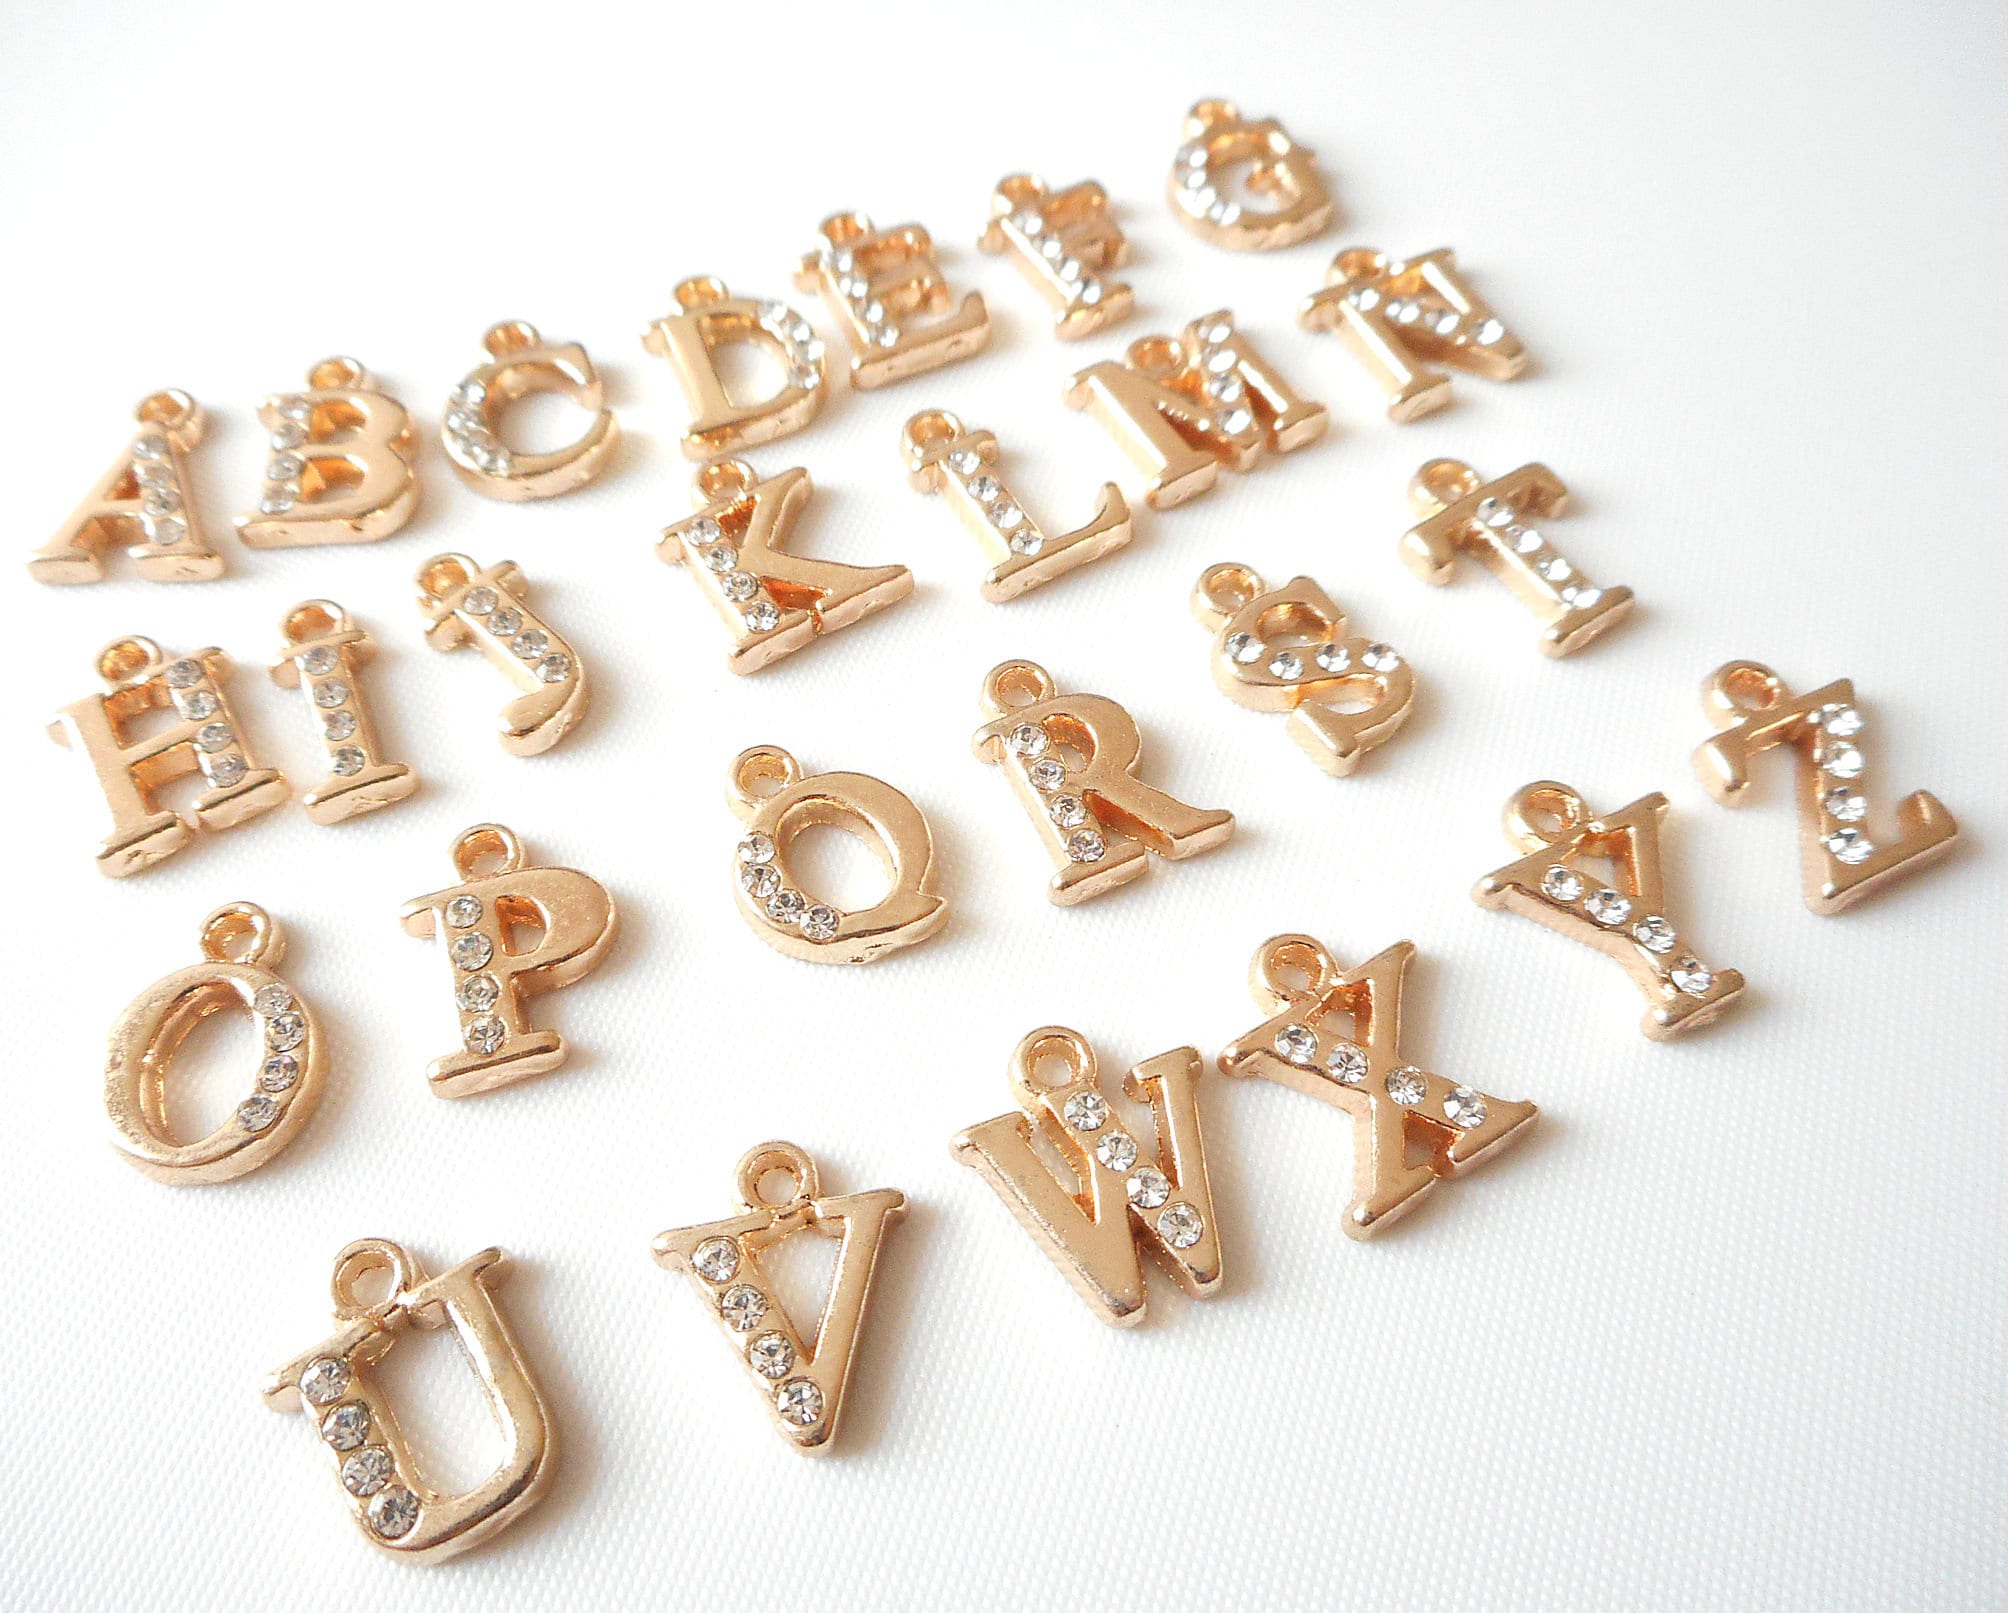 26 Alphabet Letters Set-1 Loop Gold Plated Letter Charms W/ | Etsy